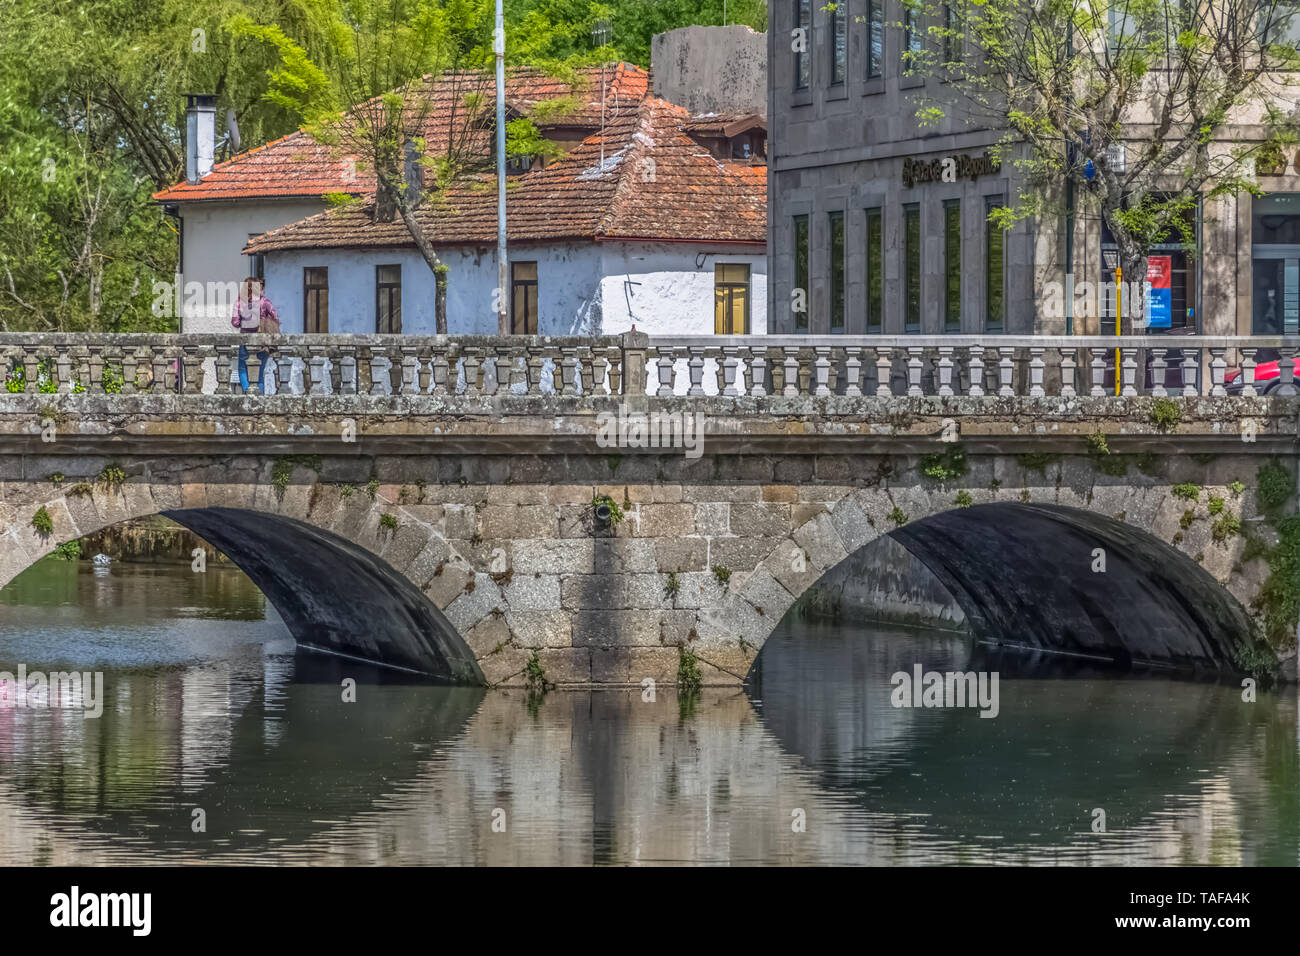 Viseu / Portugal - 04 16 2019 : View of the downtown area of Viseu with Pavia river and banks with buildings, trees and vegetation in Portugal Stock Photo